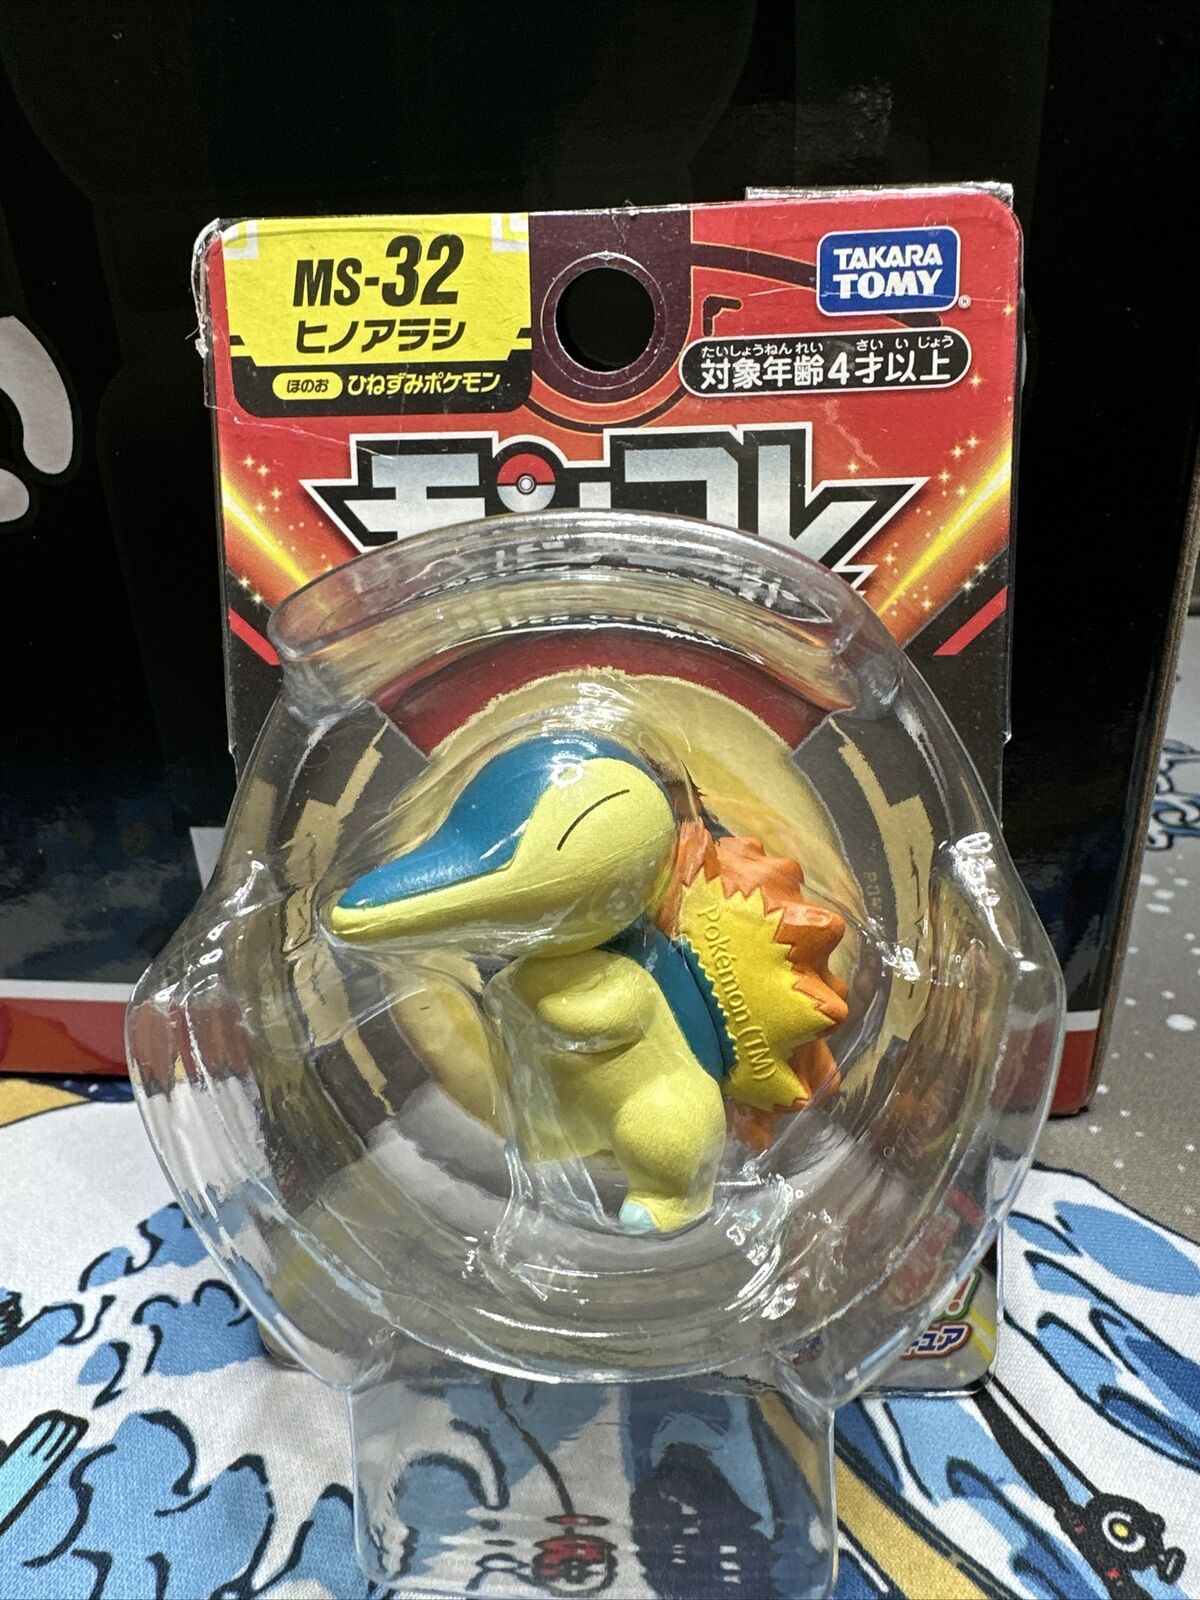 Pokemon Cyndaquil - MS-32 Moncolle Series 2" Figure Takara Tomy US IN STOCK